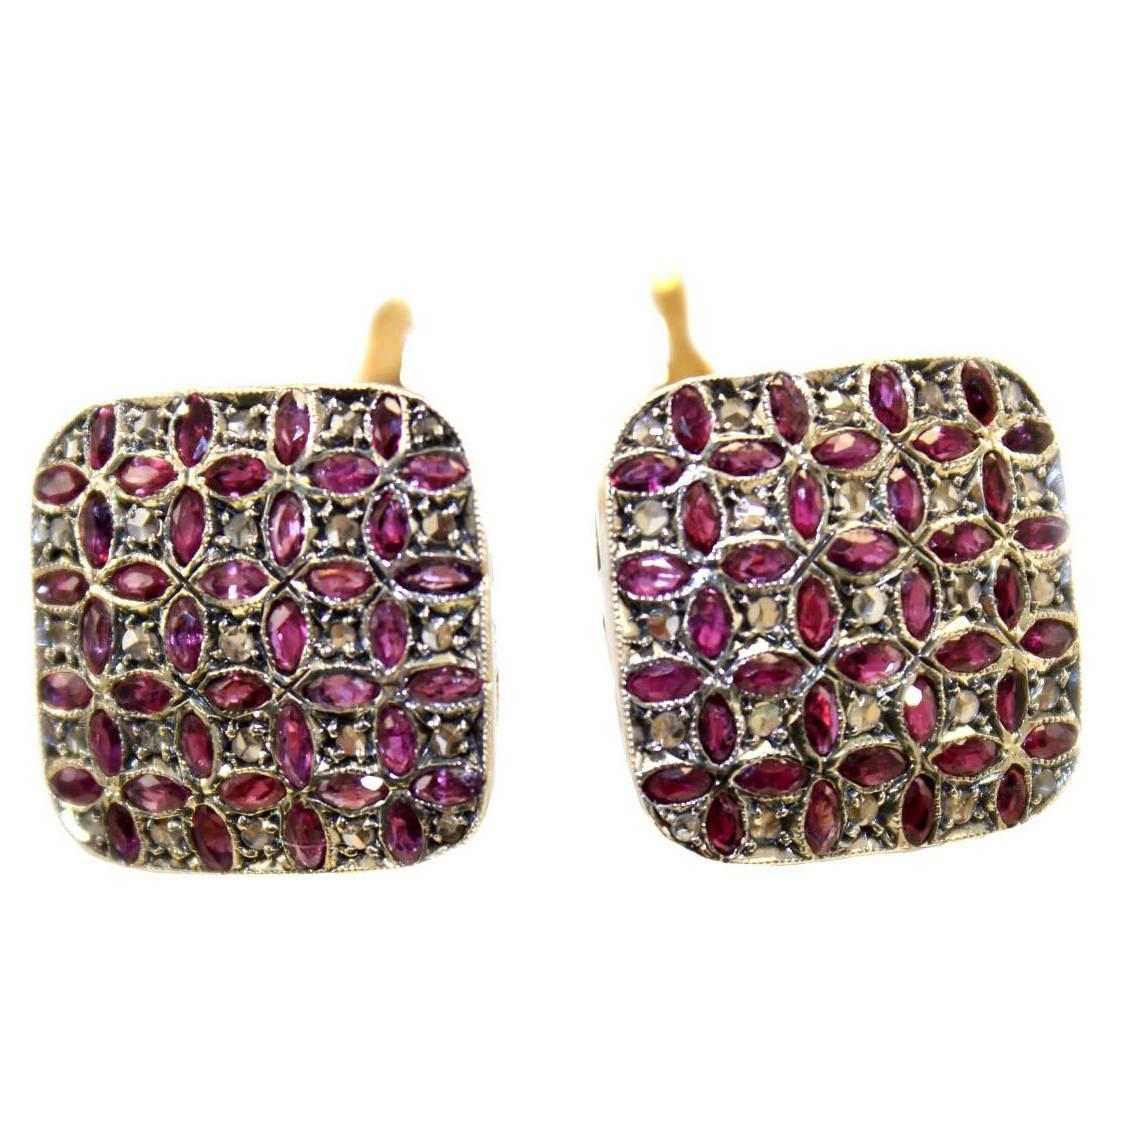  Gold and Silver Diamond Ruby Stud Earring